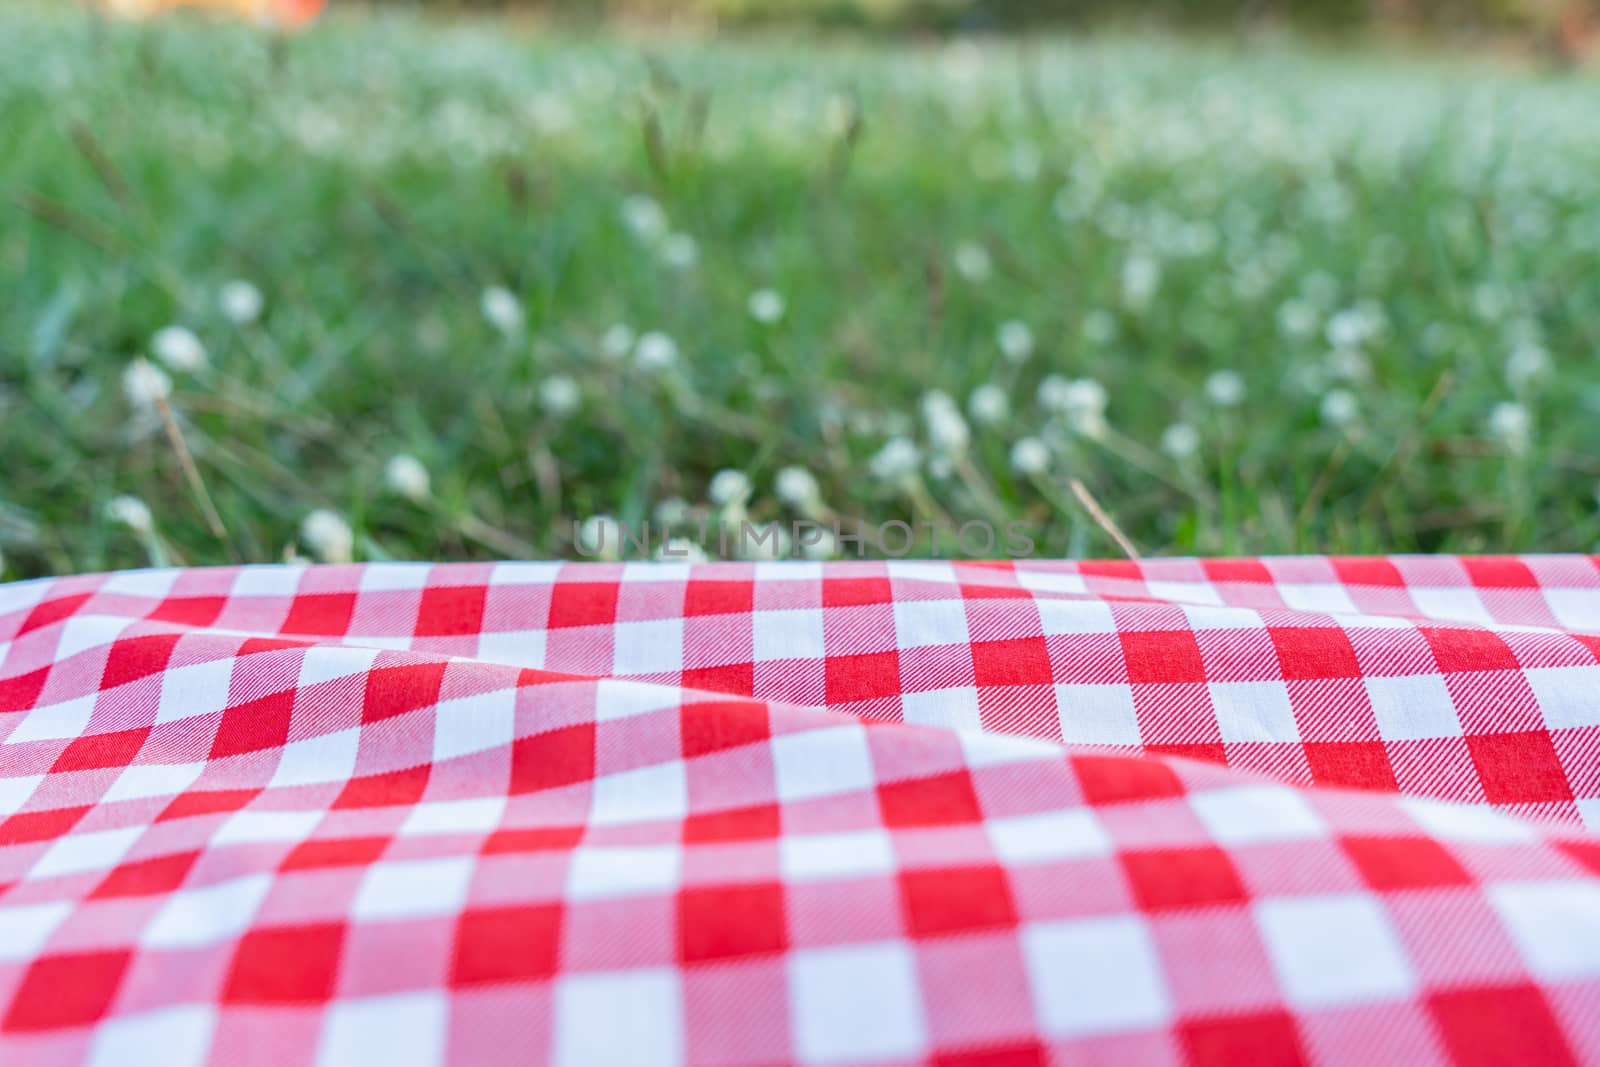 Red checkered tablecloth texture with on green grass at the gard by Buttus_casso